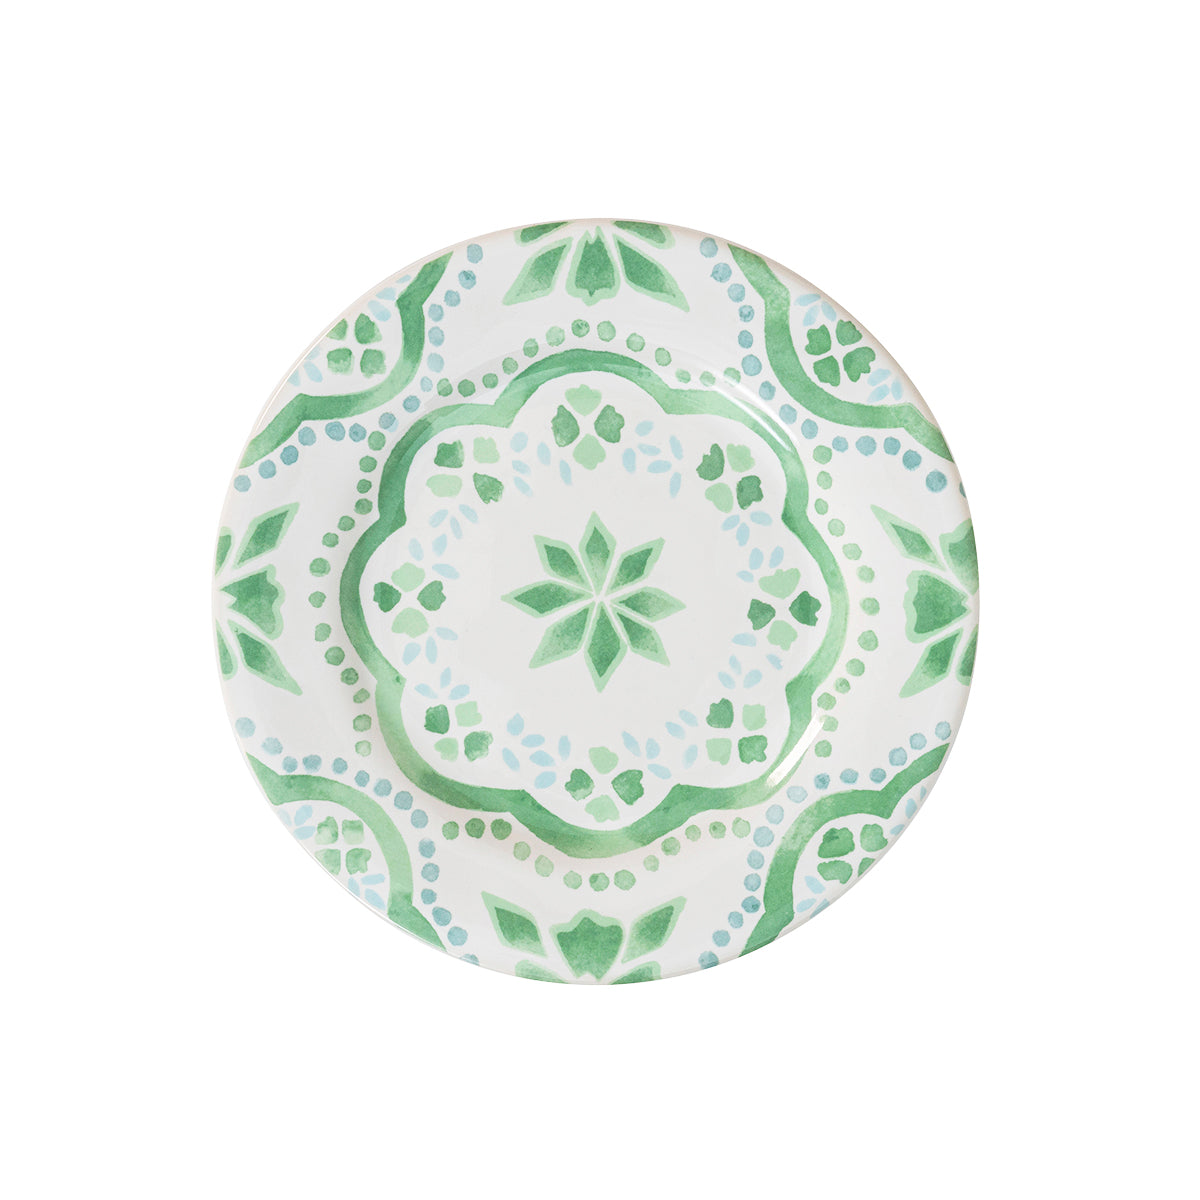 The beguiling pattern of this side/cocktail plate was inspired by the intricately painted tiles we found on an escapade to the Iberian Coast and makes an eye-catching accent piece for tablesettings. Featuring a verdant palette of soft sage and sky-blue hues that are both refreshing and soothing - you will want to use this gorgeous green plate for serving appetizers, tapas, and sides.